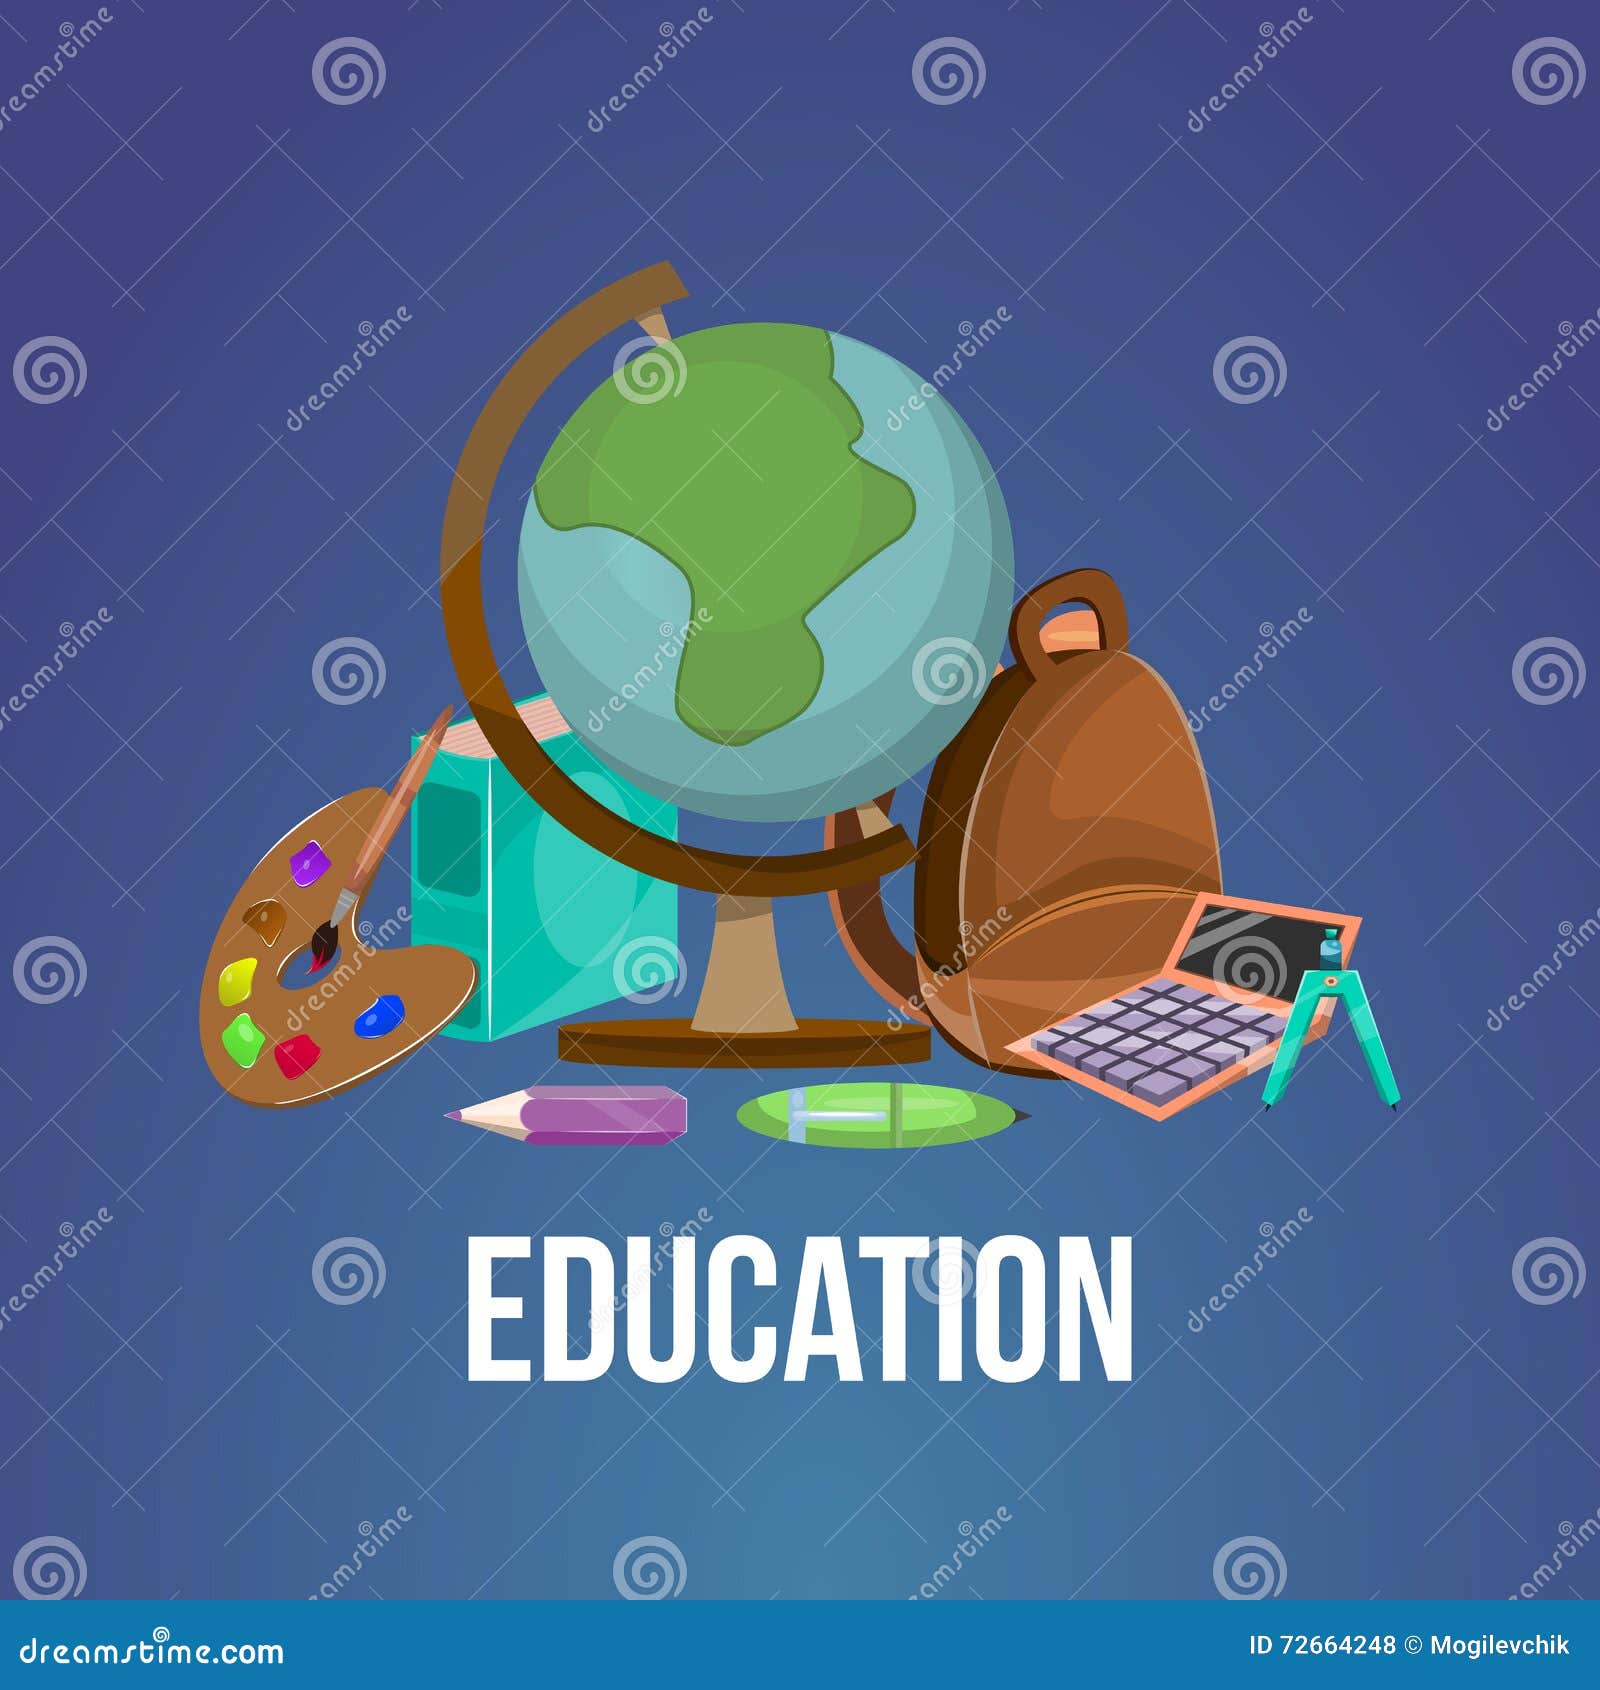 cartoon-education-poster-flyer-tools-books-accessories-needed-to-study-subjects-learning-general-vector-illustration-72664248.jpg